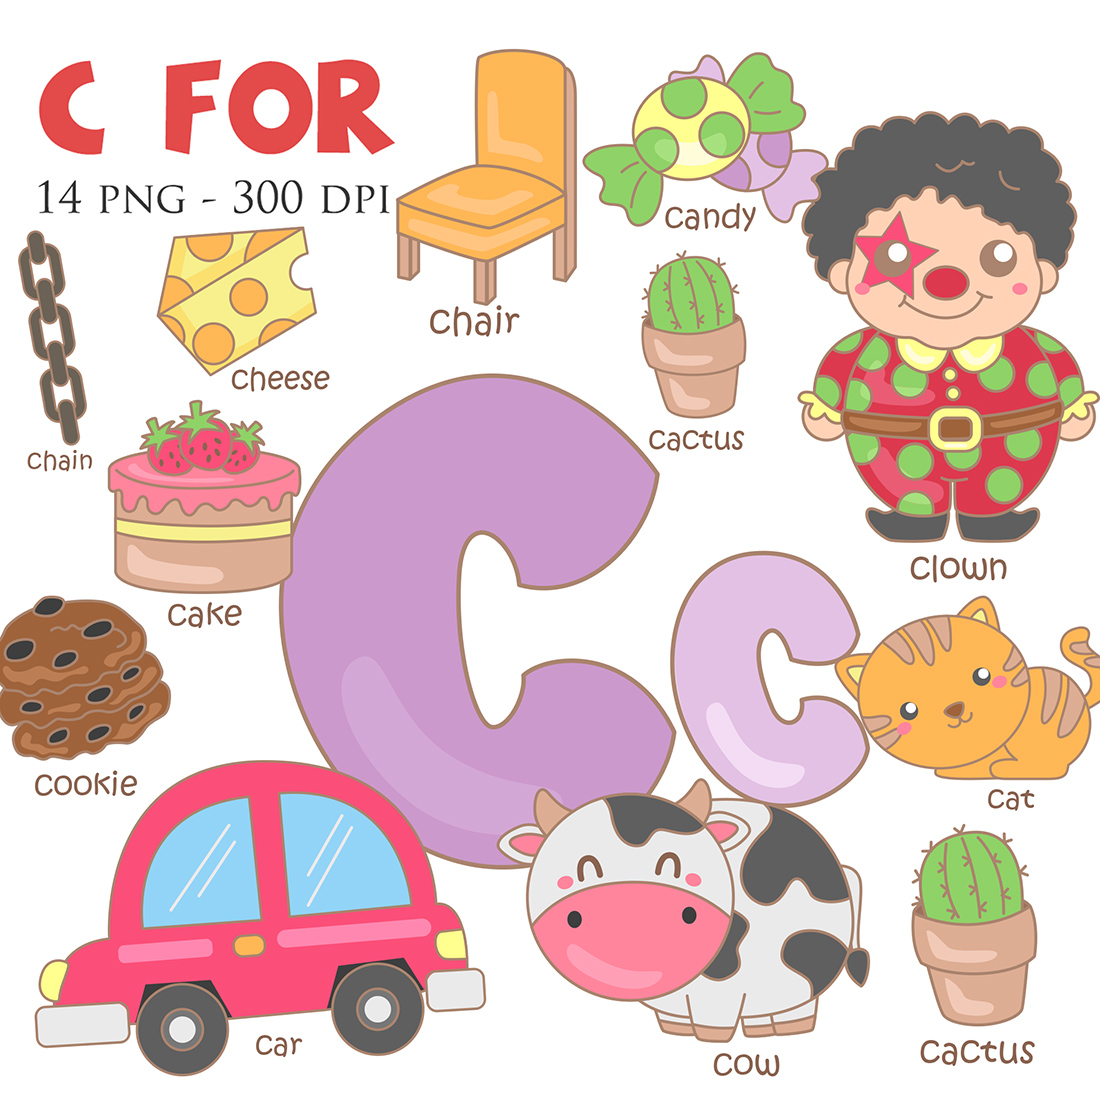 C For Vocabulary School Letter Reading Writing Font Study Learning Student Toodler Kids Car Crab Cake Clown Cookie Cow Cactus Cheese Candy Chain Chair Cat Cartoon Illustration Vector Clipart cover image.